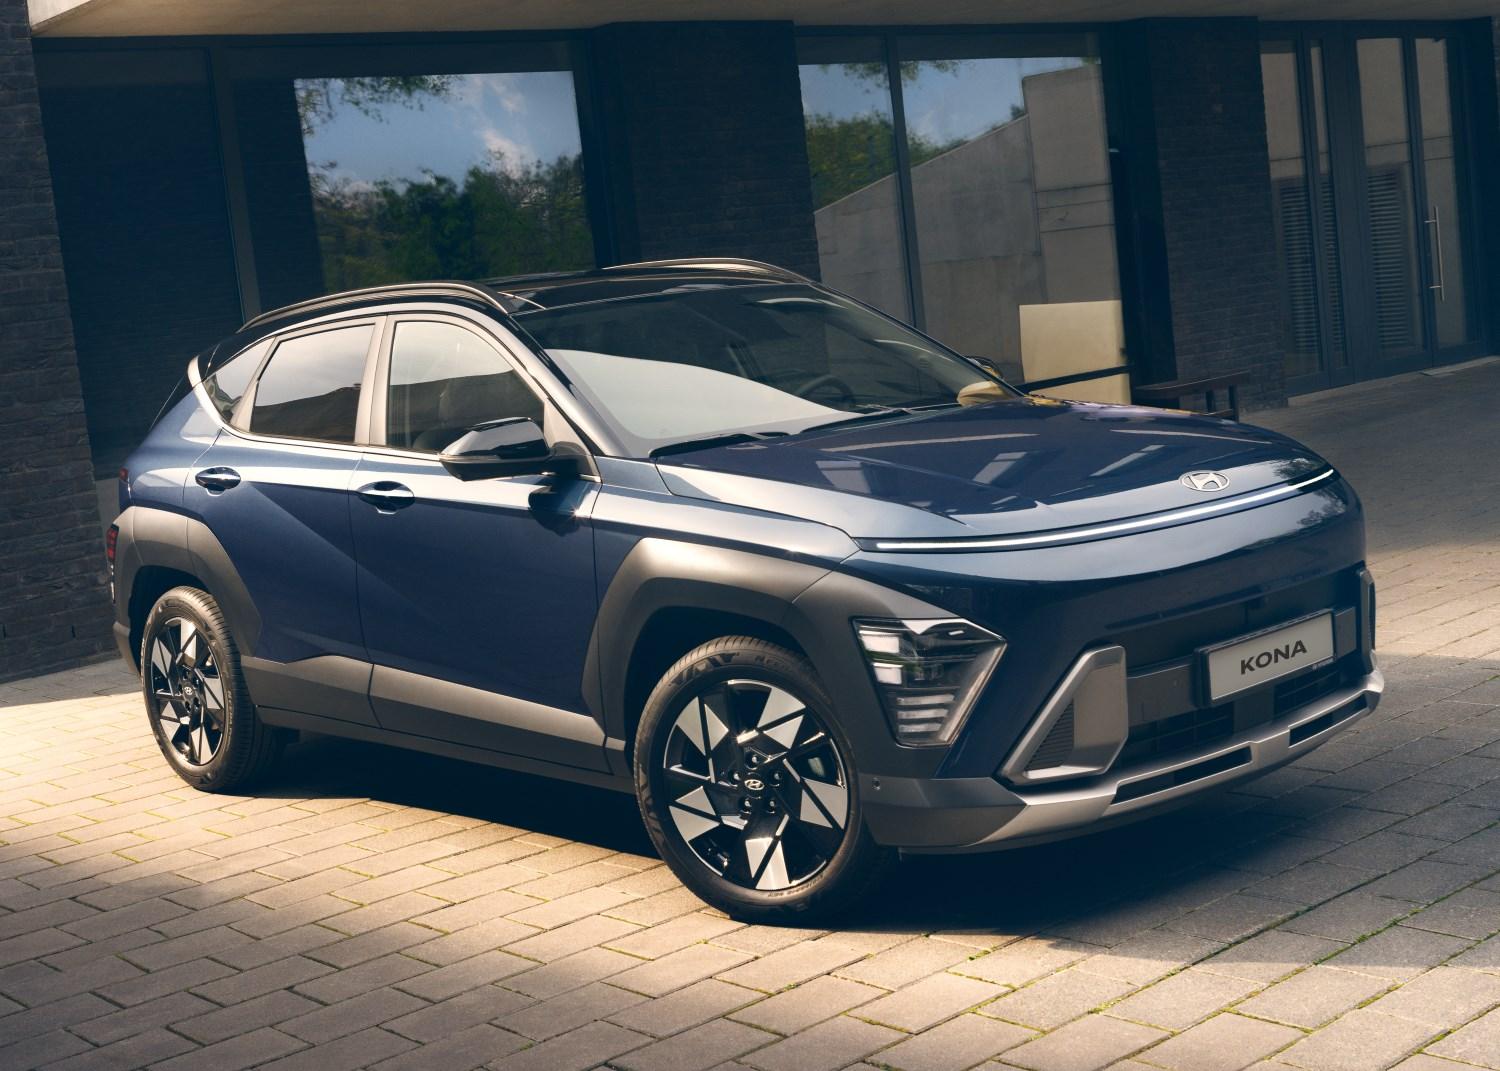 Three quarter right view of one Navy Blue Hyundai KONA car Parked outdoors in front of a building.